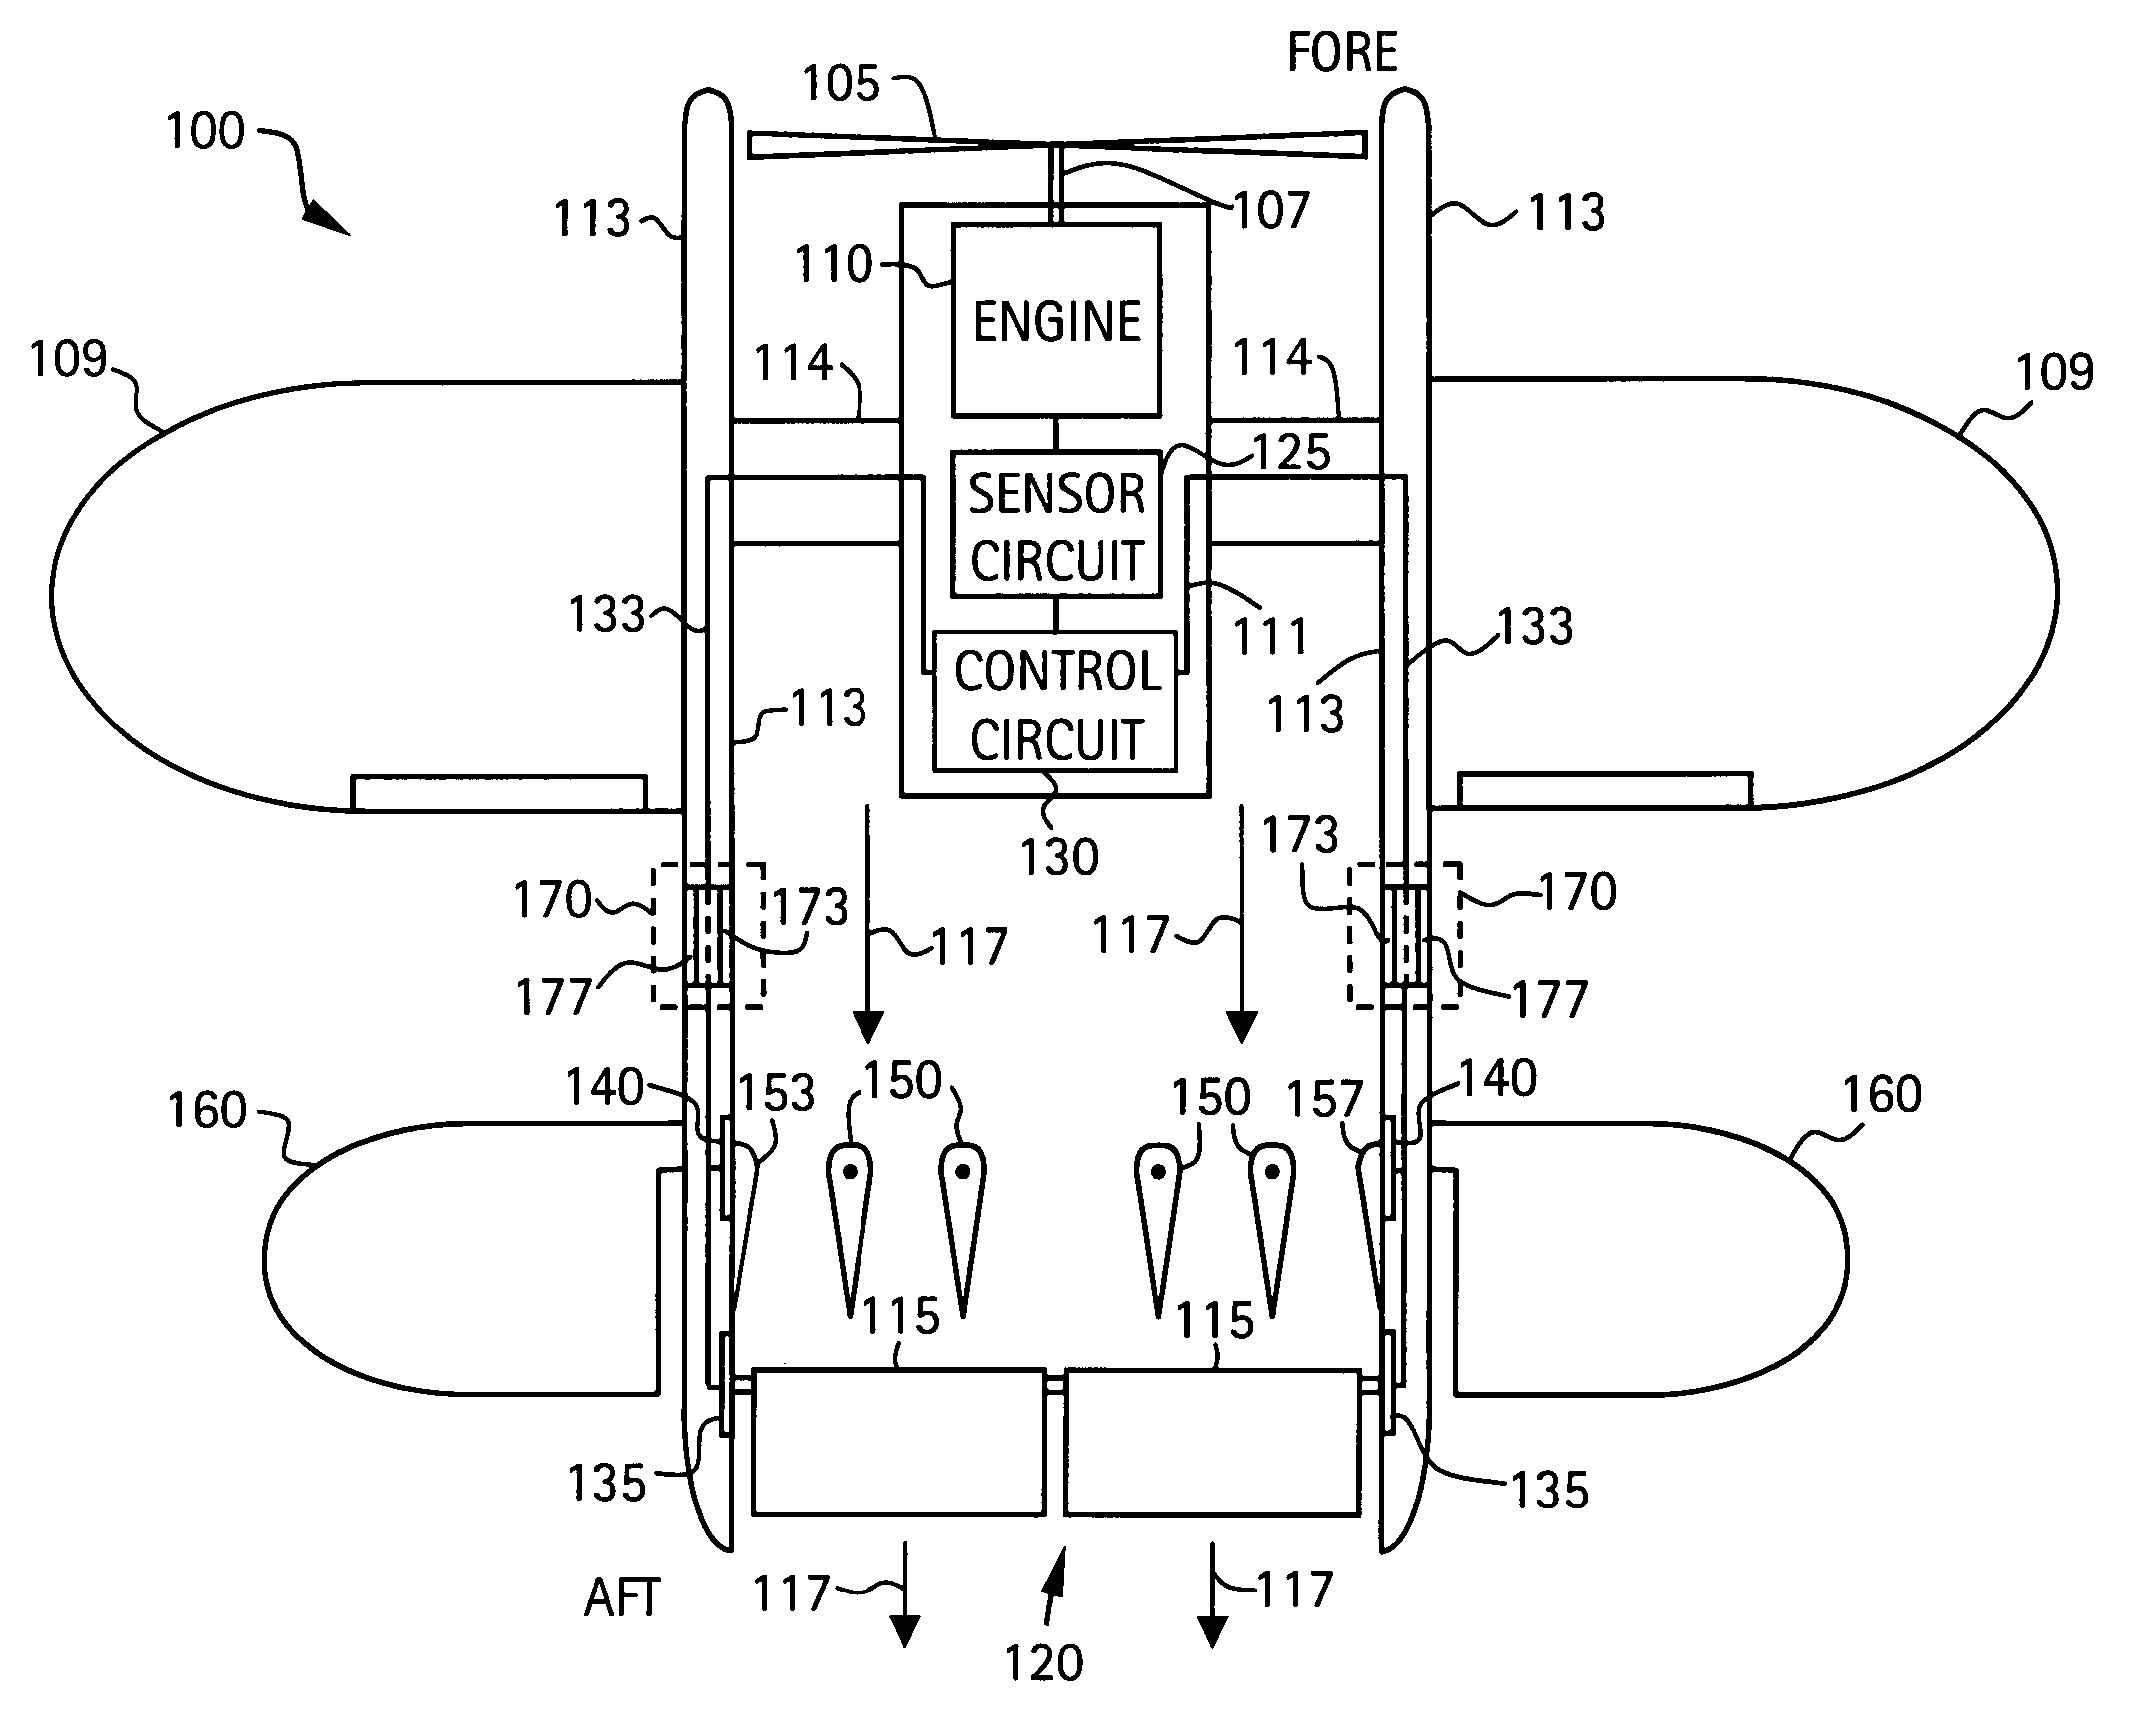 System and method for controlling engine RPM of a ducted fan aircraft